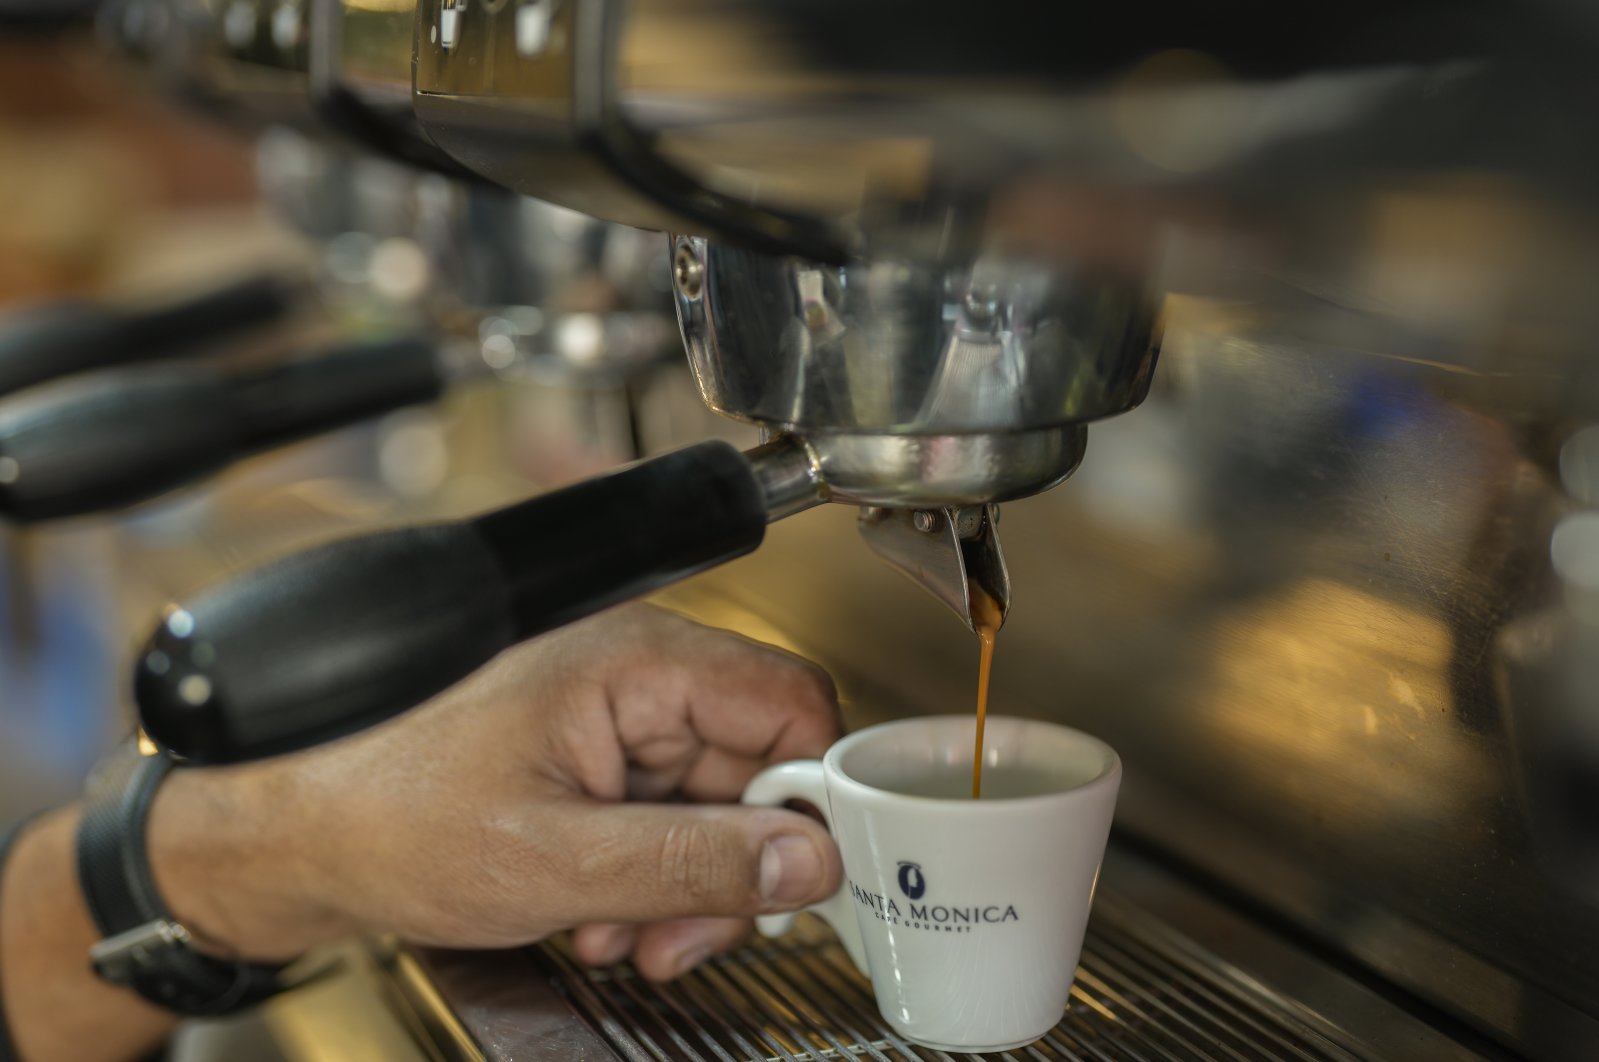 A cup of espresso is prepared at a restaurant in Sao Paulo, Brazil, May 12, 2022. (AP Photo)